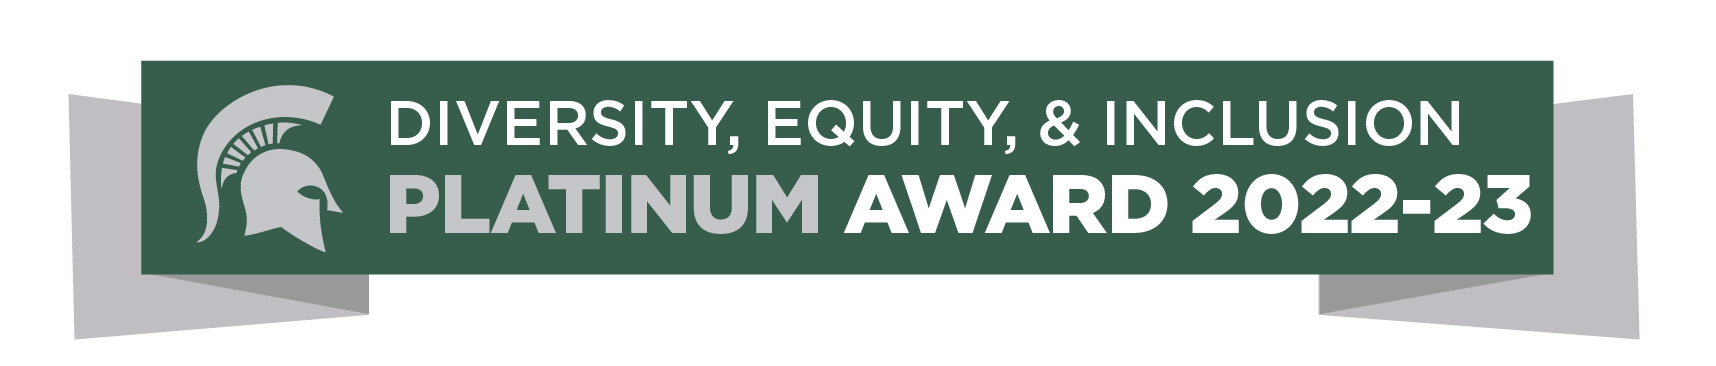 Diversity, Equity & Inclusion Platinum Award 2022-23 with Spartan helmet